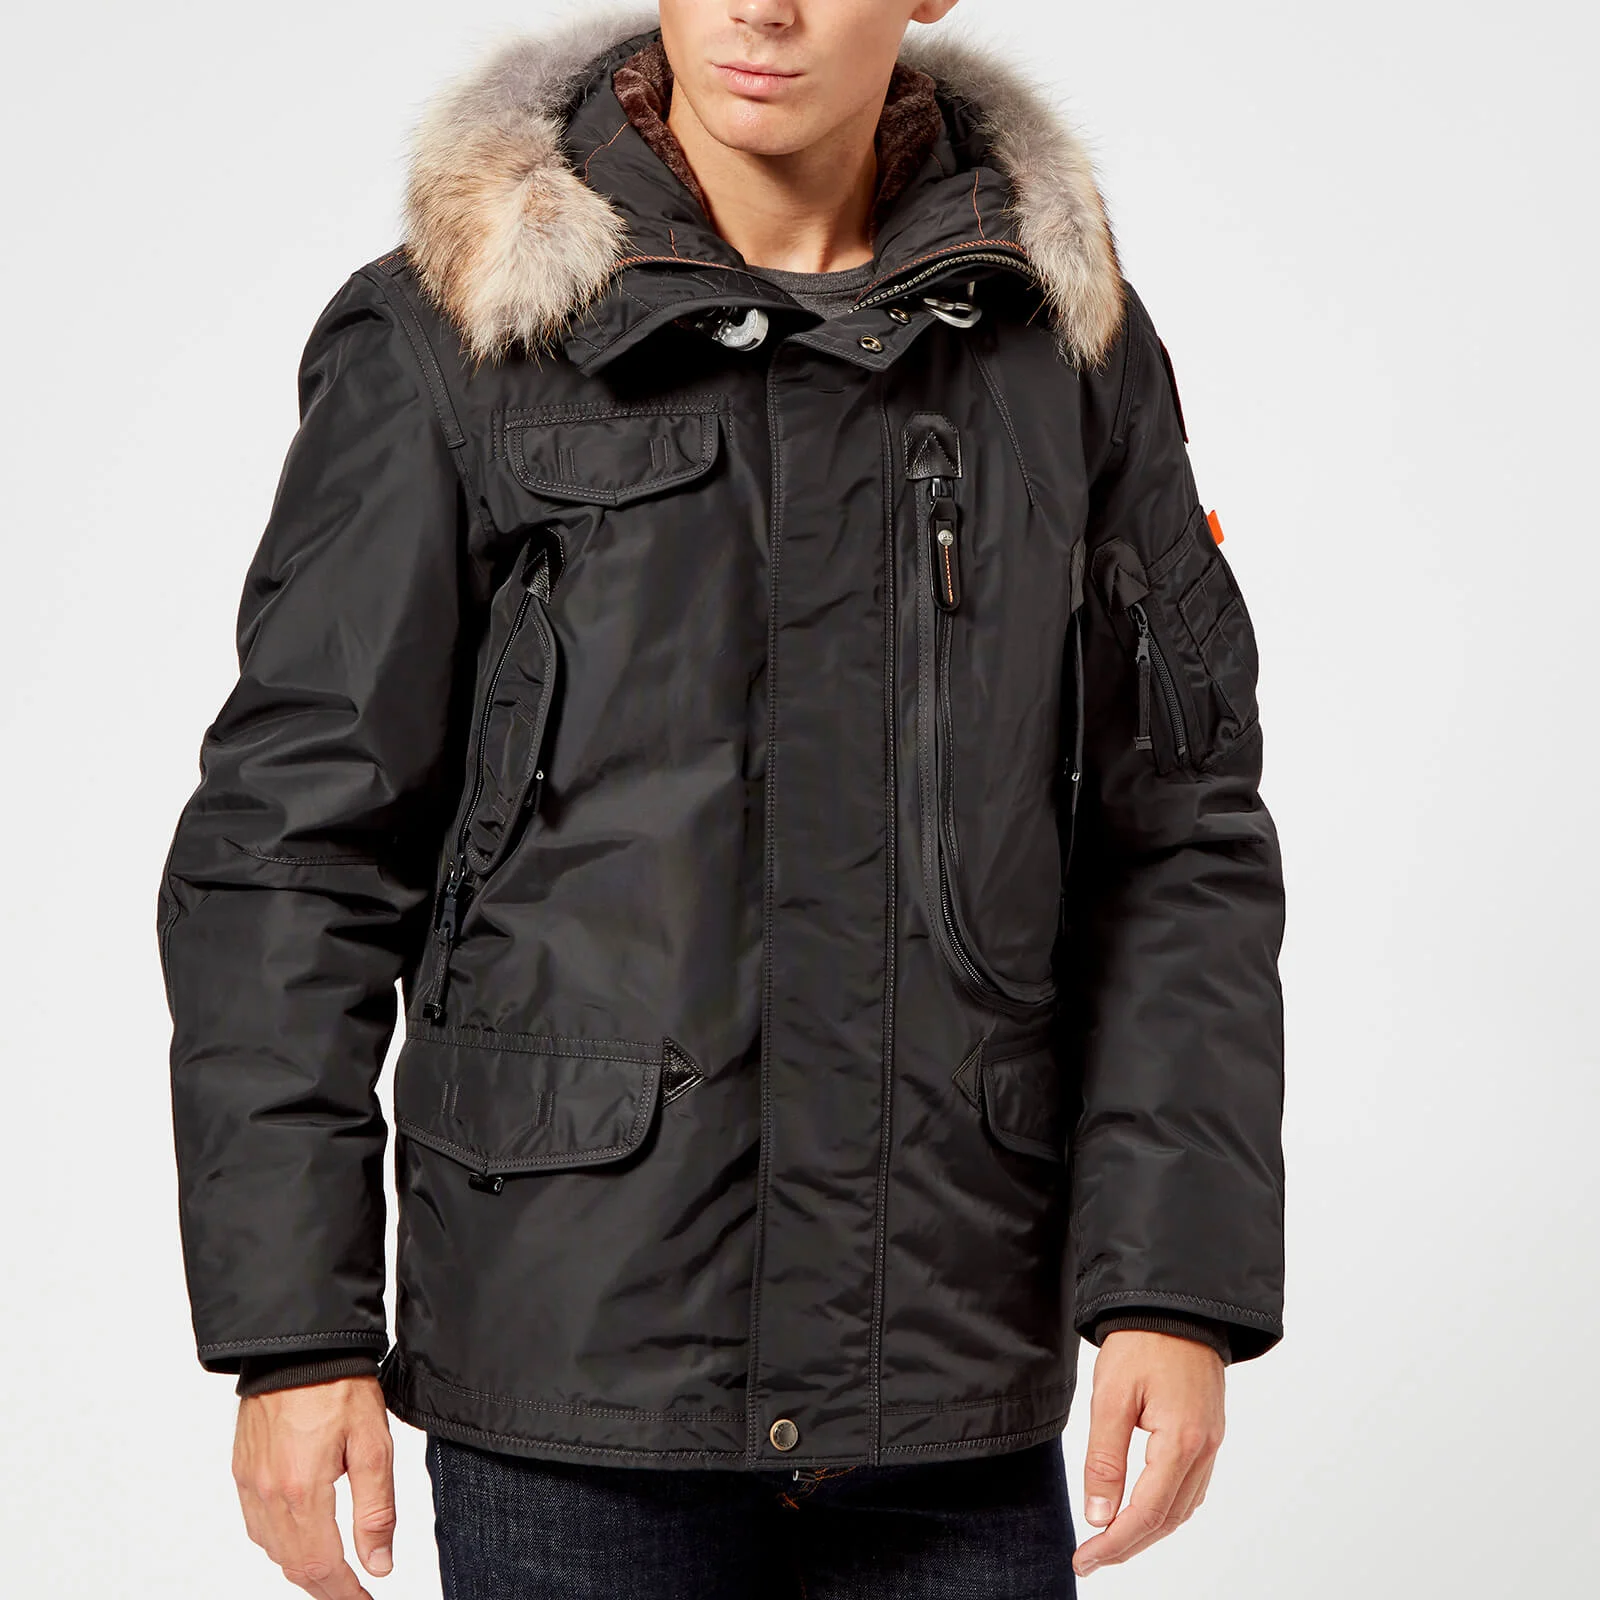 Parajumpers Men's Right Hand Jacket - Anthracite Image 1